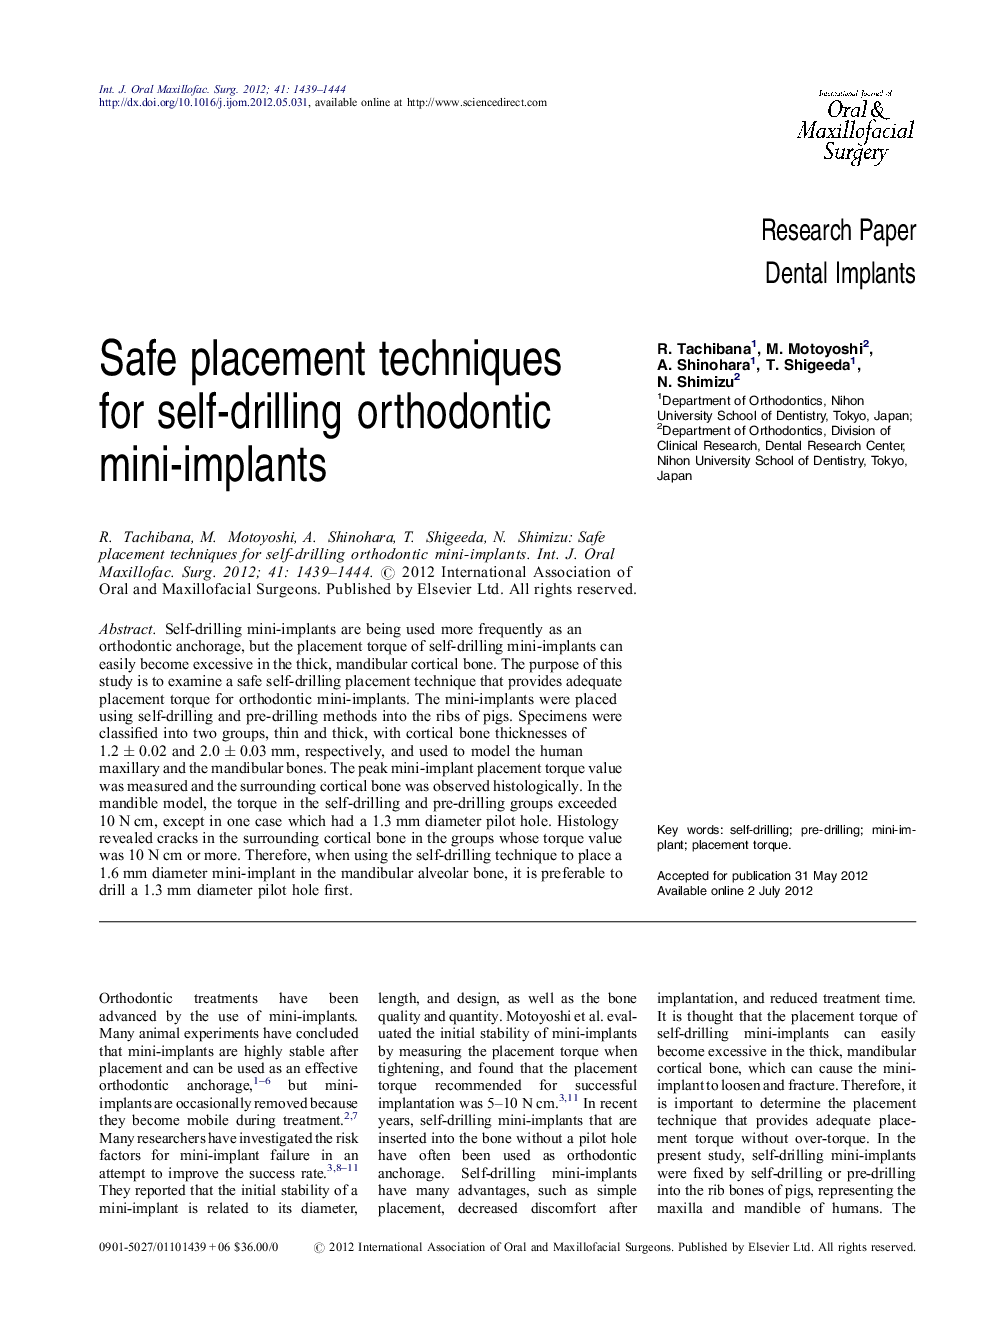 Safe placement techniques for self-drilling orthodontic mini-implants